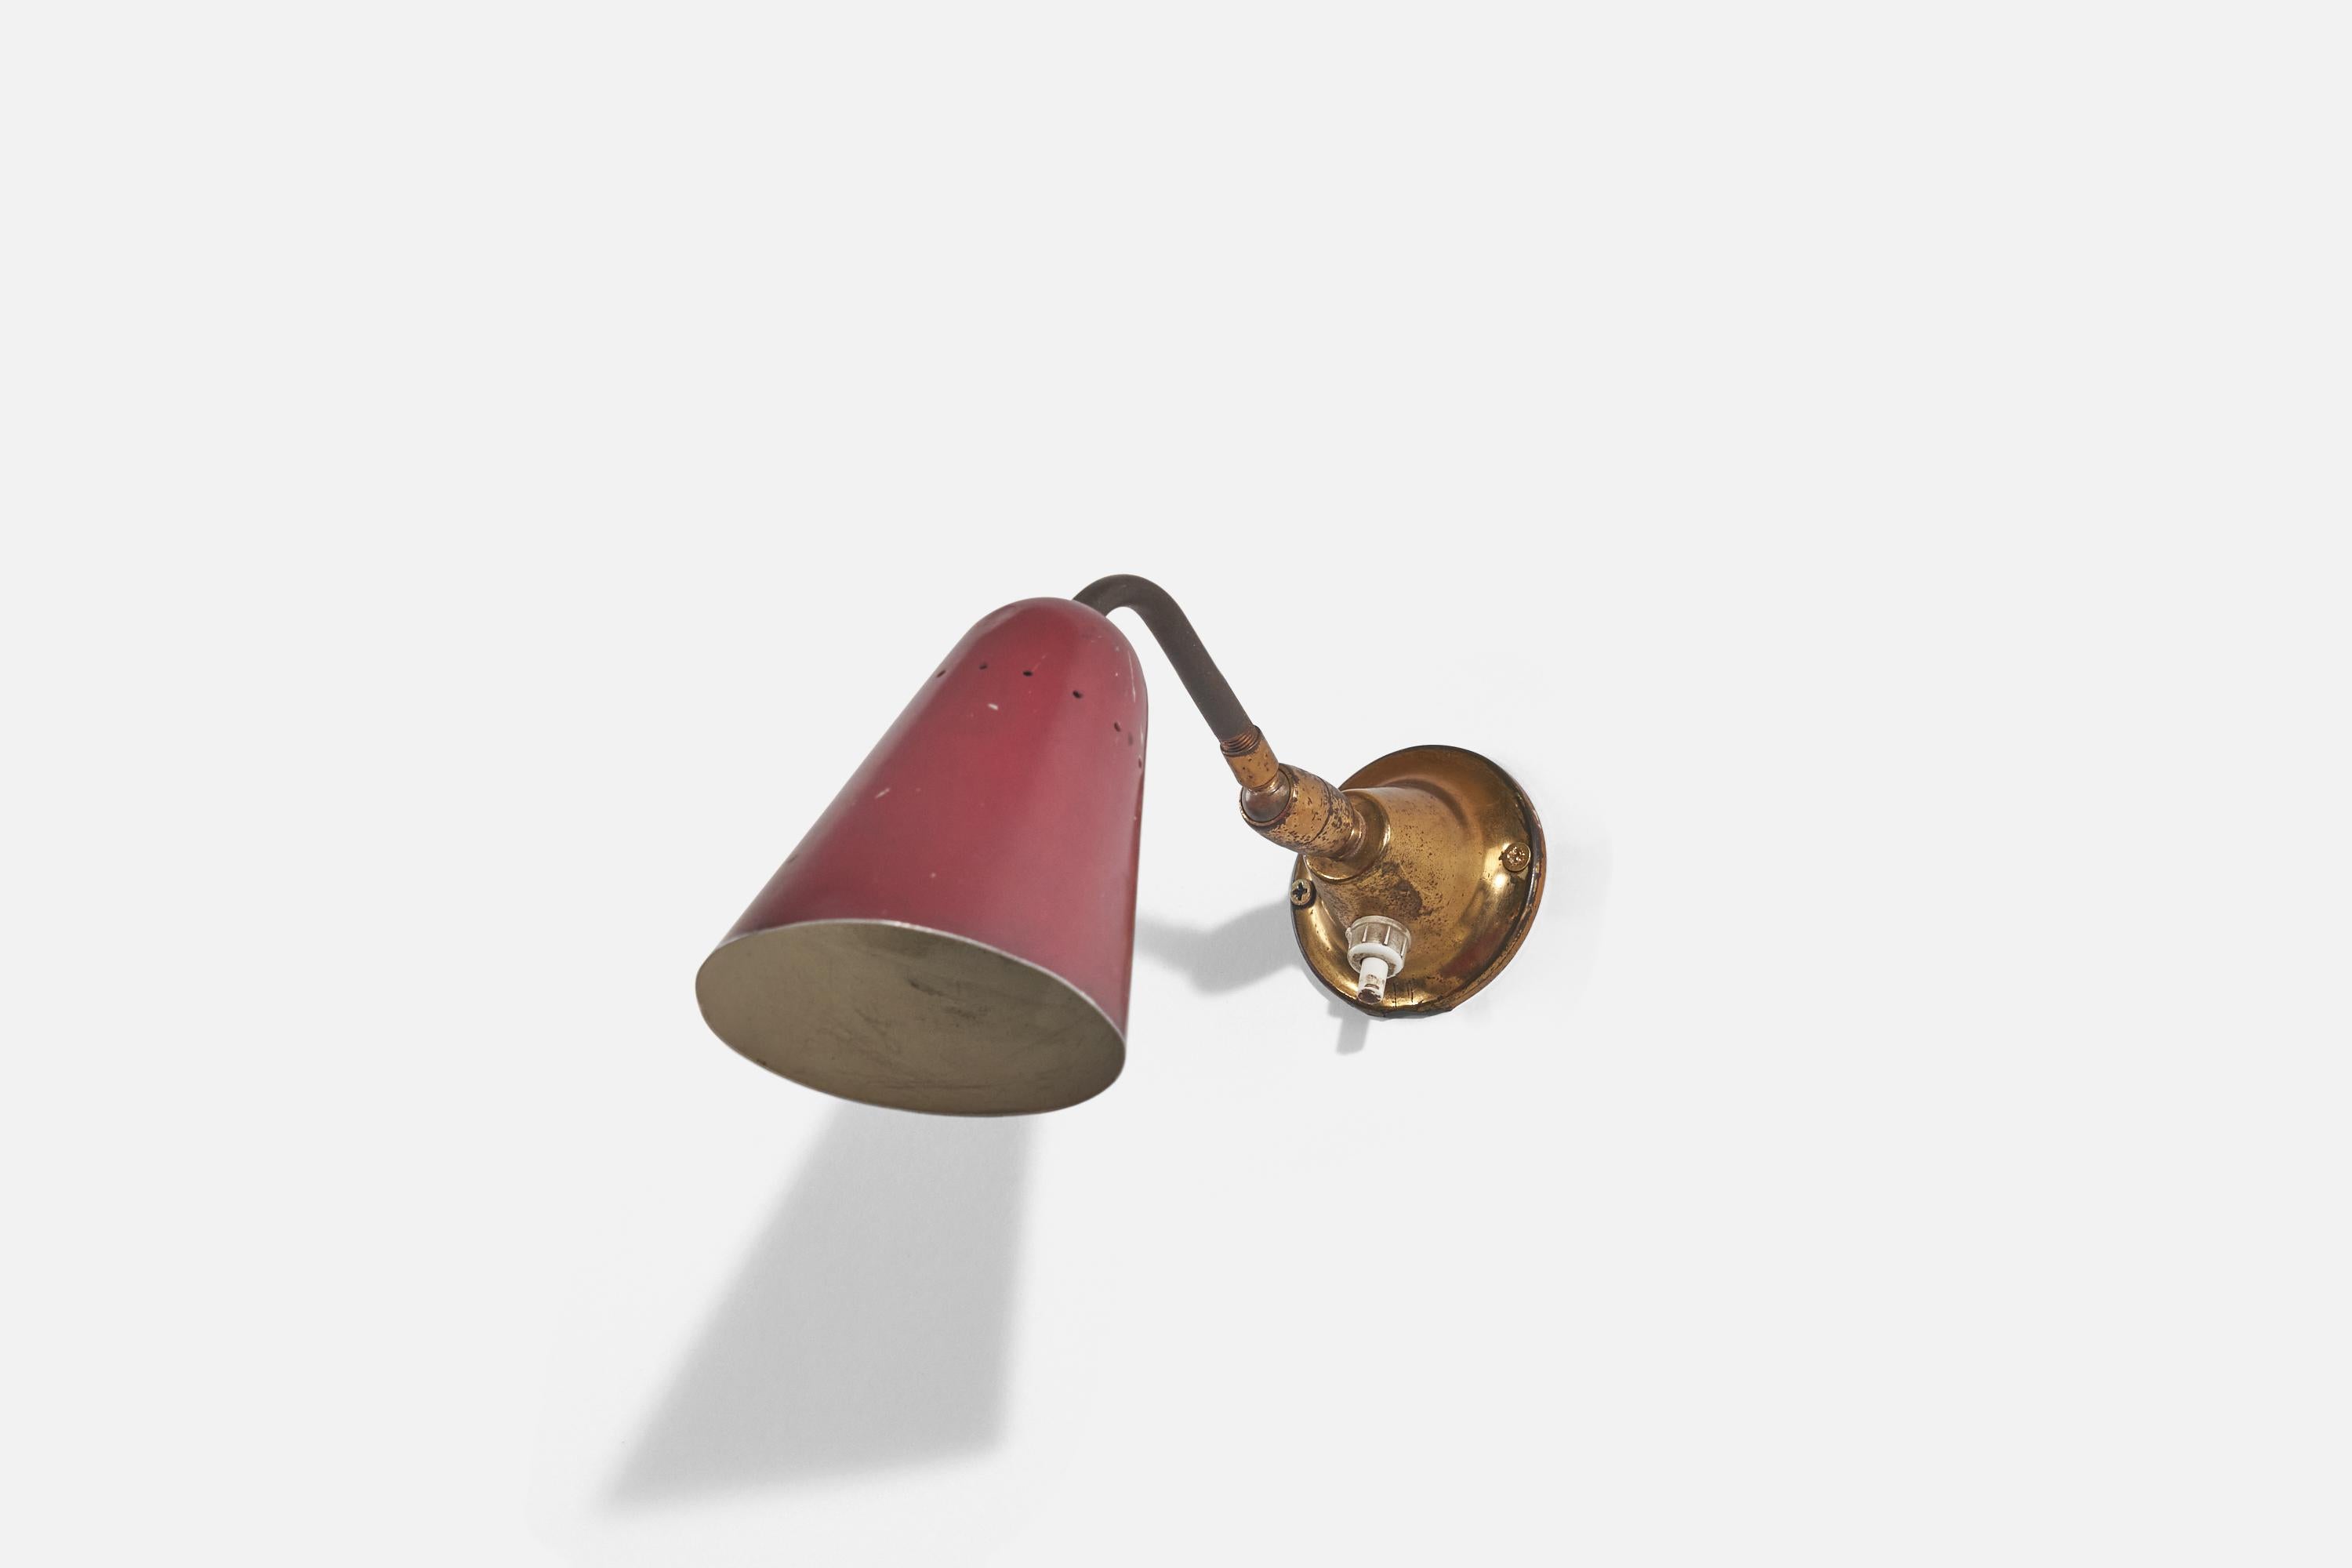 A brass and red-lacquered metal wall light designed and produced by an Italian designer, Italy, 1950s.

Variable dimensions, measured as illustrated in the first image.
Dimensions of back plate (inches) : 2.43 x 2.43 x 1.43 (H x W x D).